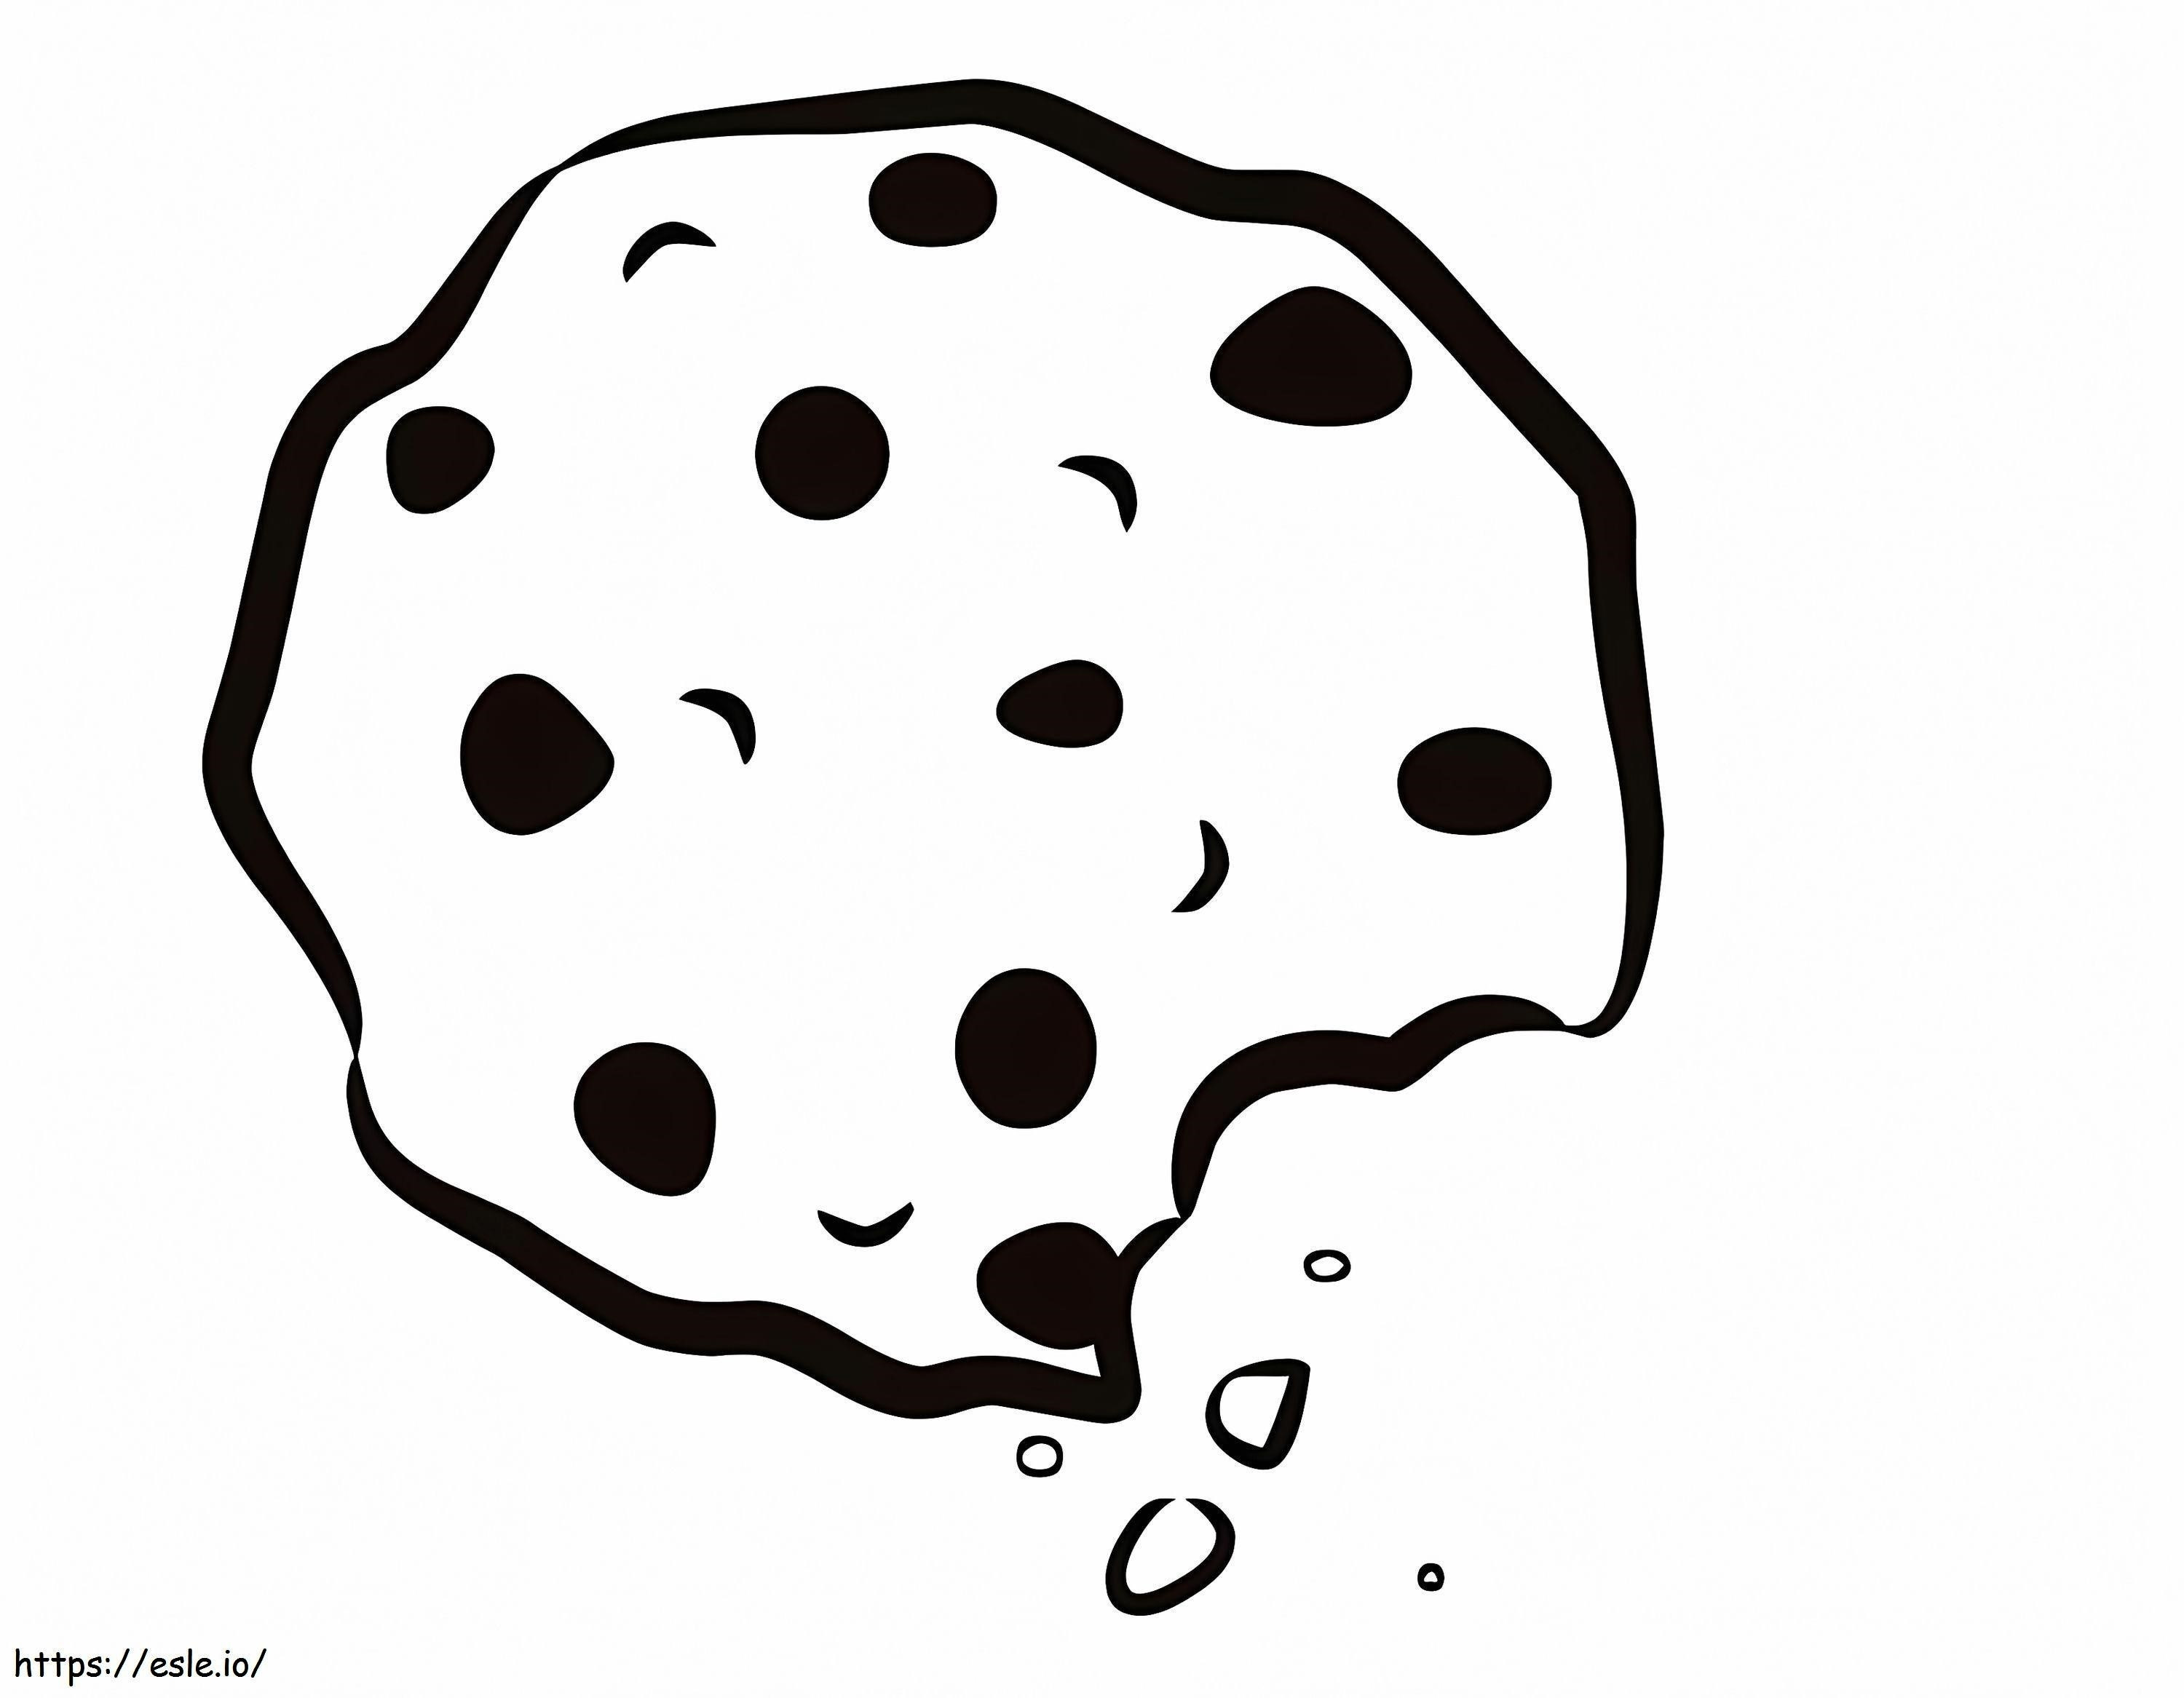 Cracked Cookie coloring page